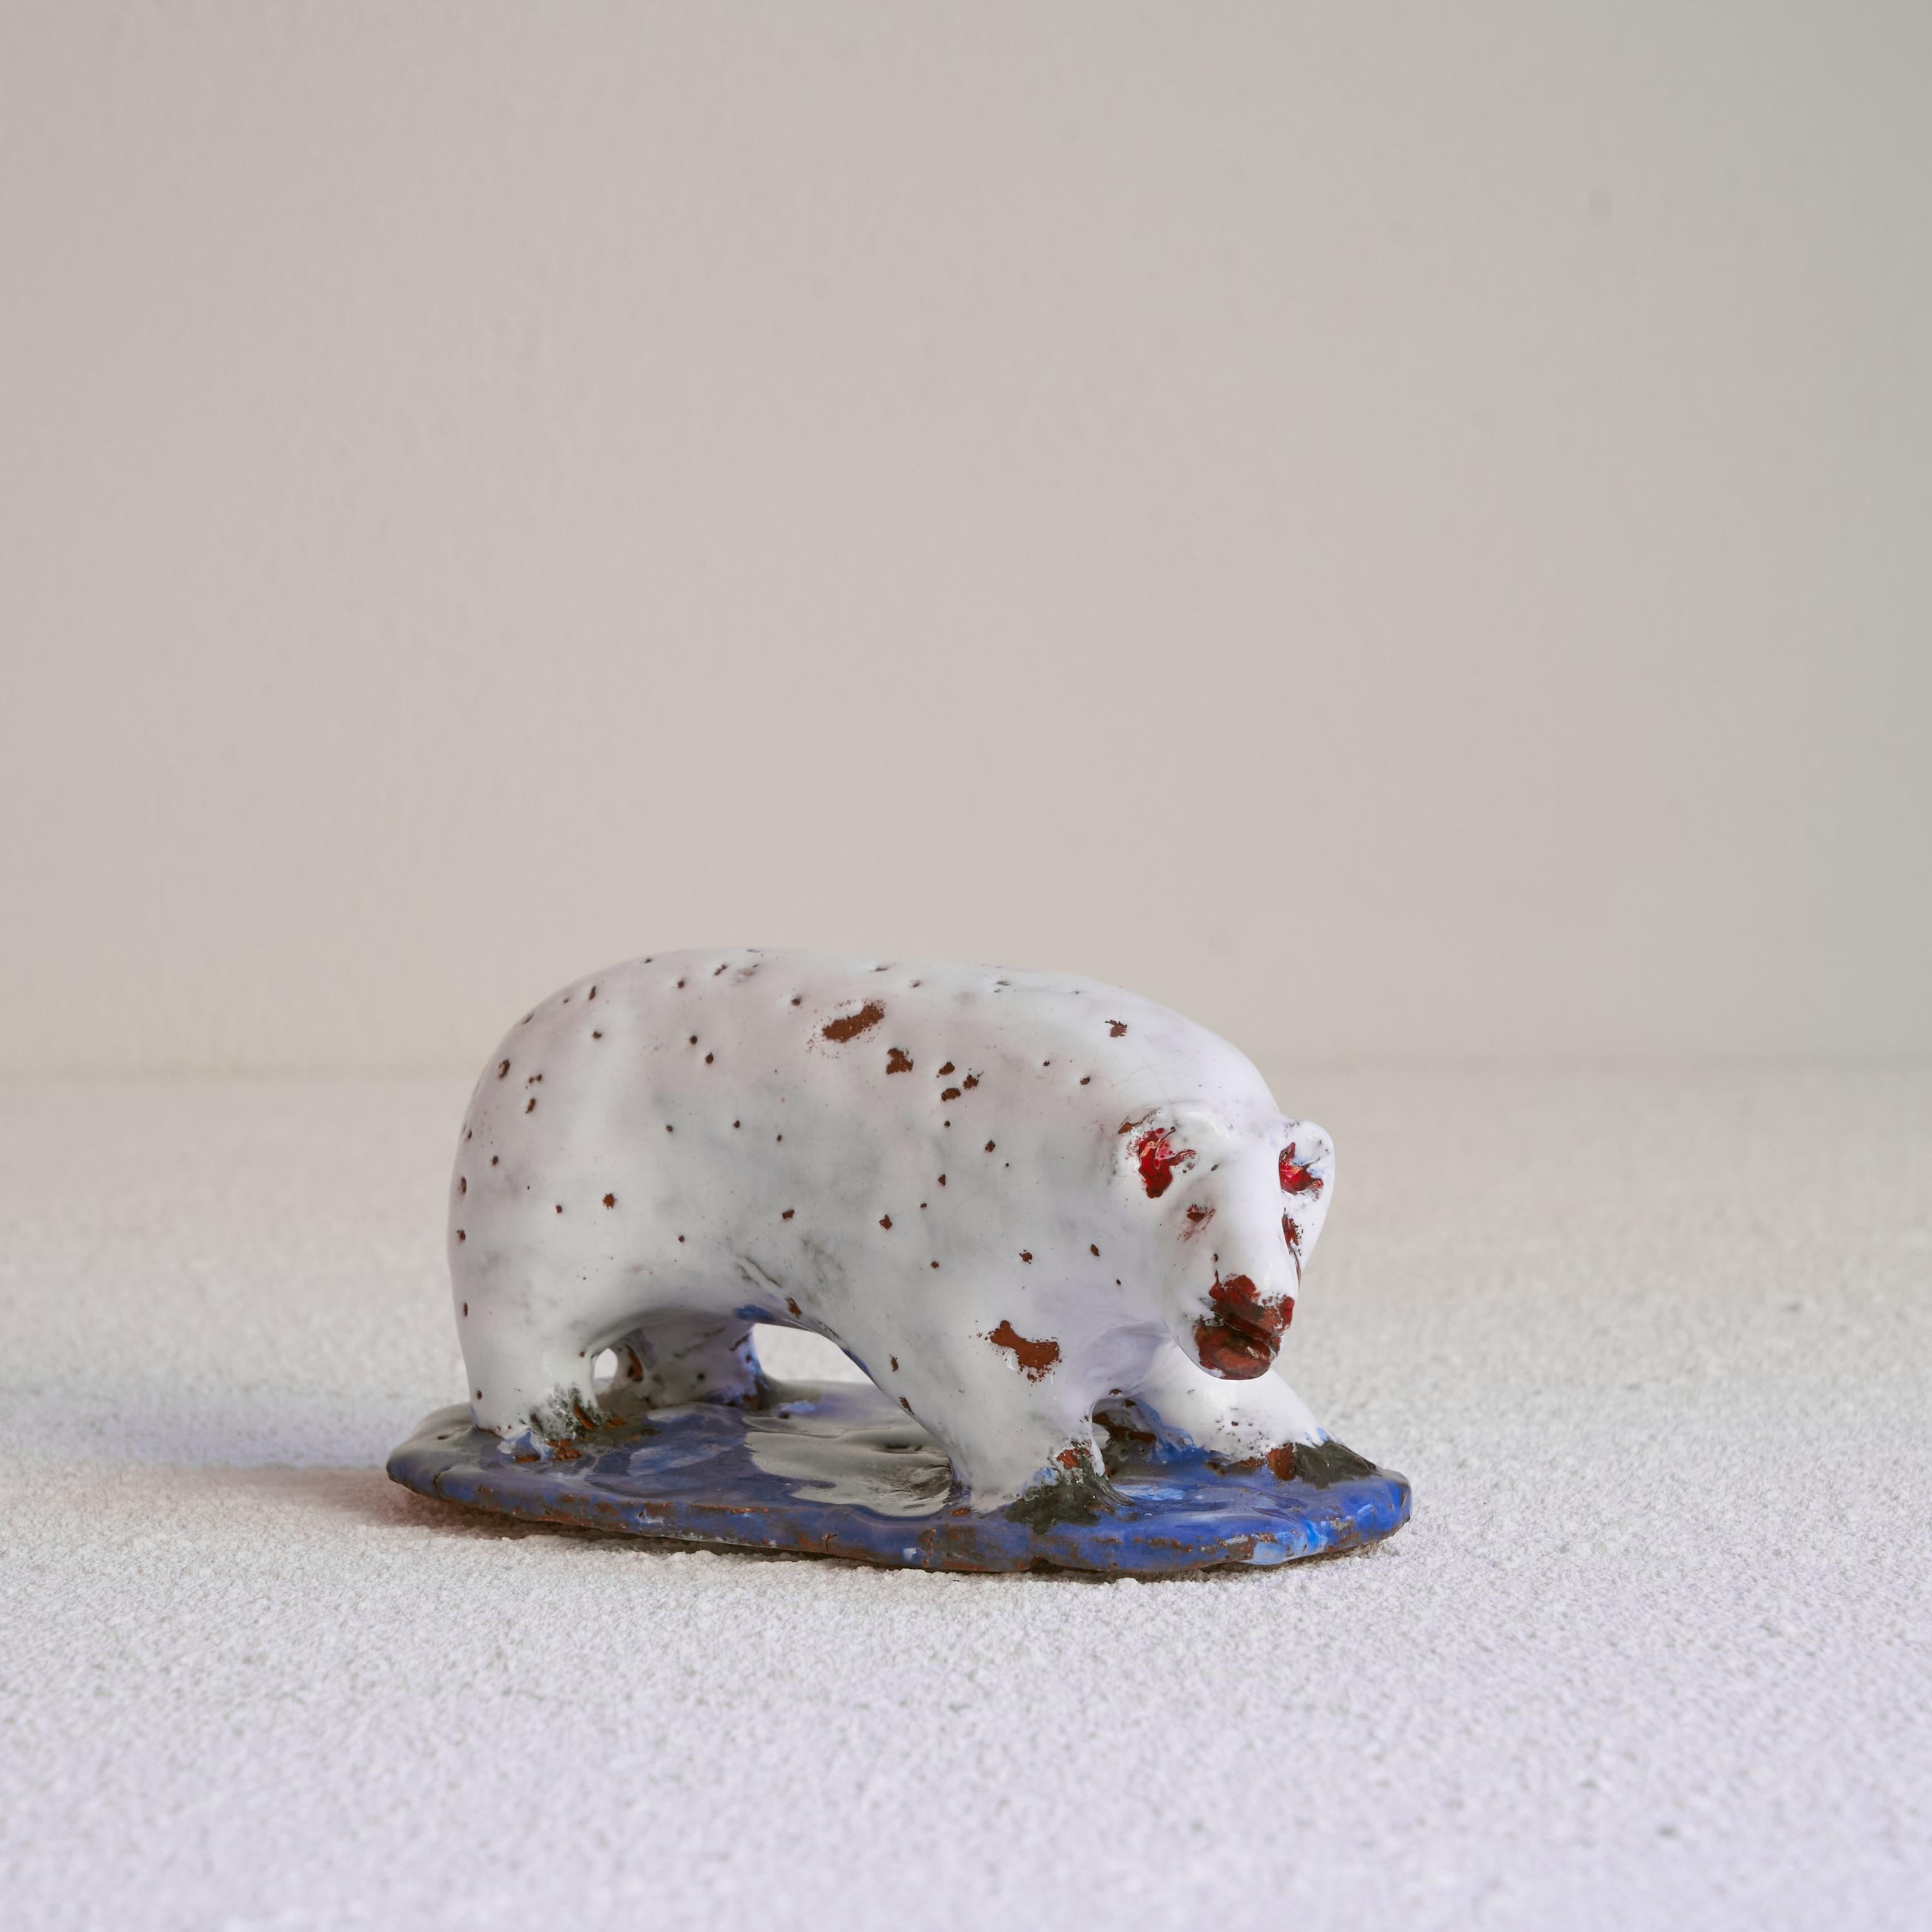 Polar bear sculpture in glazed clay, early 20th century.

Very tactile and honest sculpture of a polar bear in rough glazed clay. Very expressive and freely made sculpture with a beautiful polar white glaze and colorful details in red and blue. In